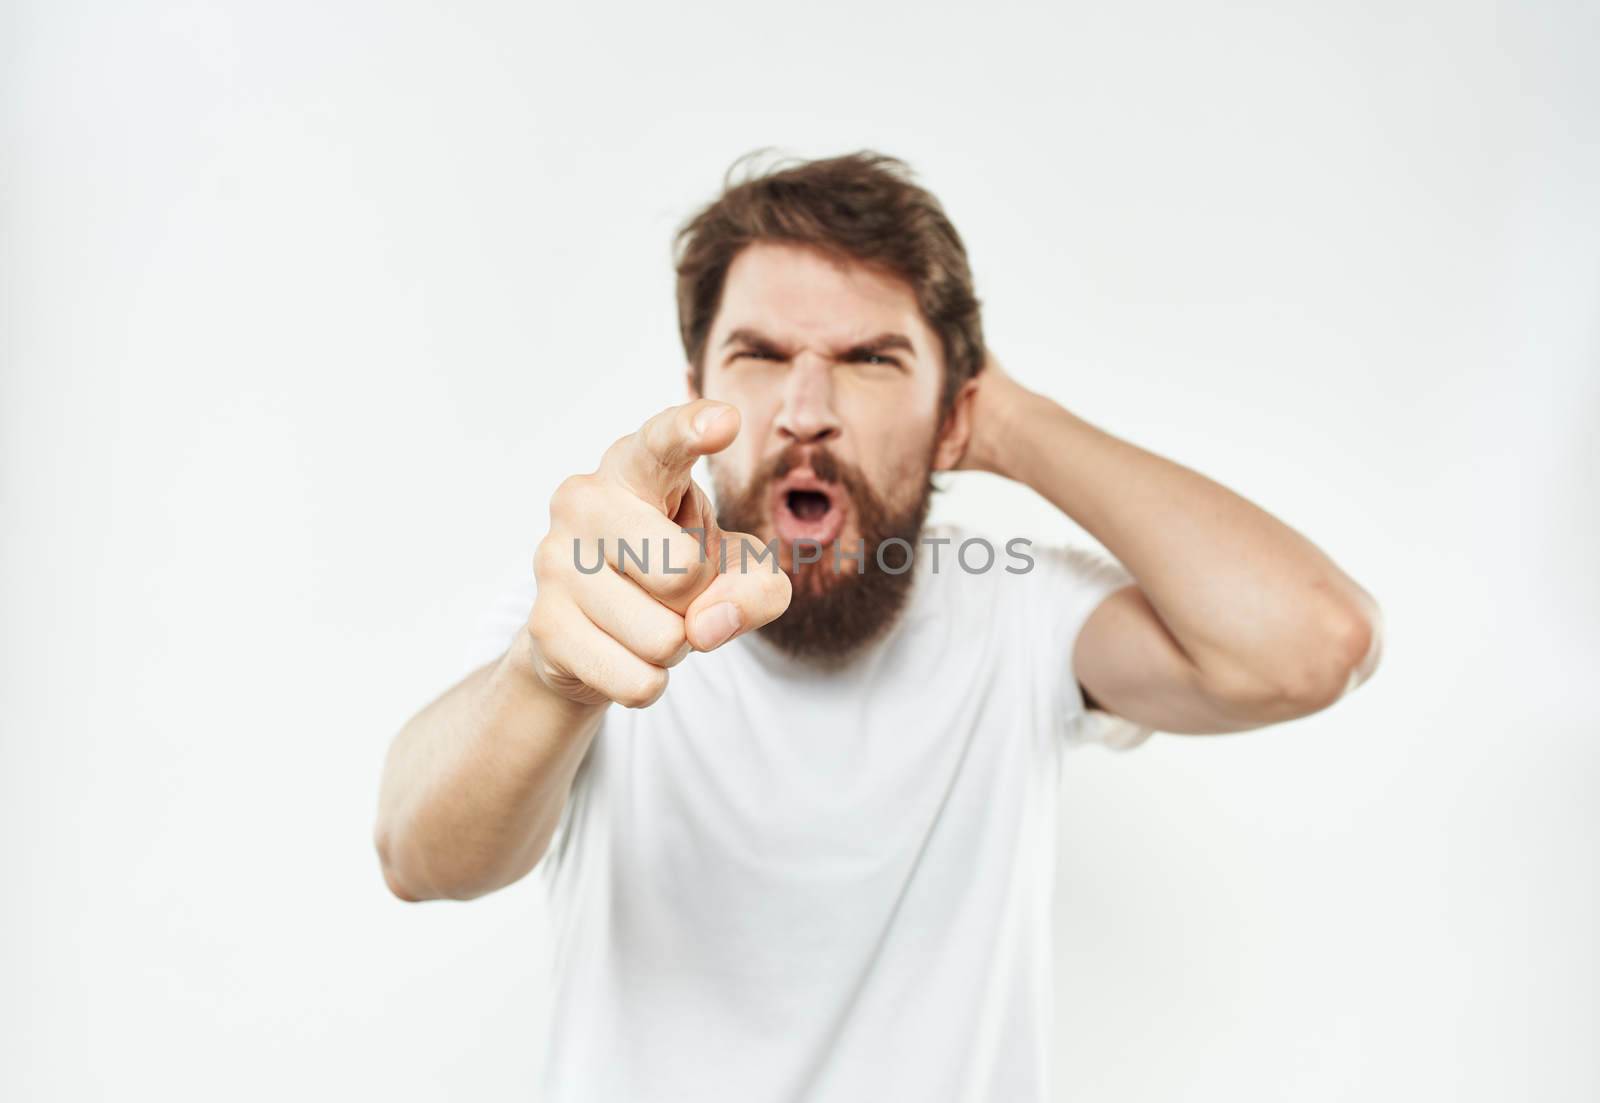 An emotional man on a light background gestures with his hands Copy Space irritability by SHOTPRIME